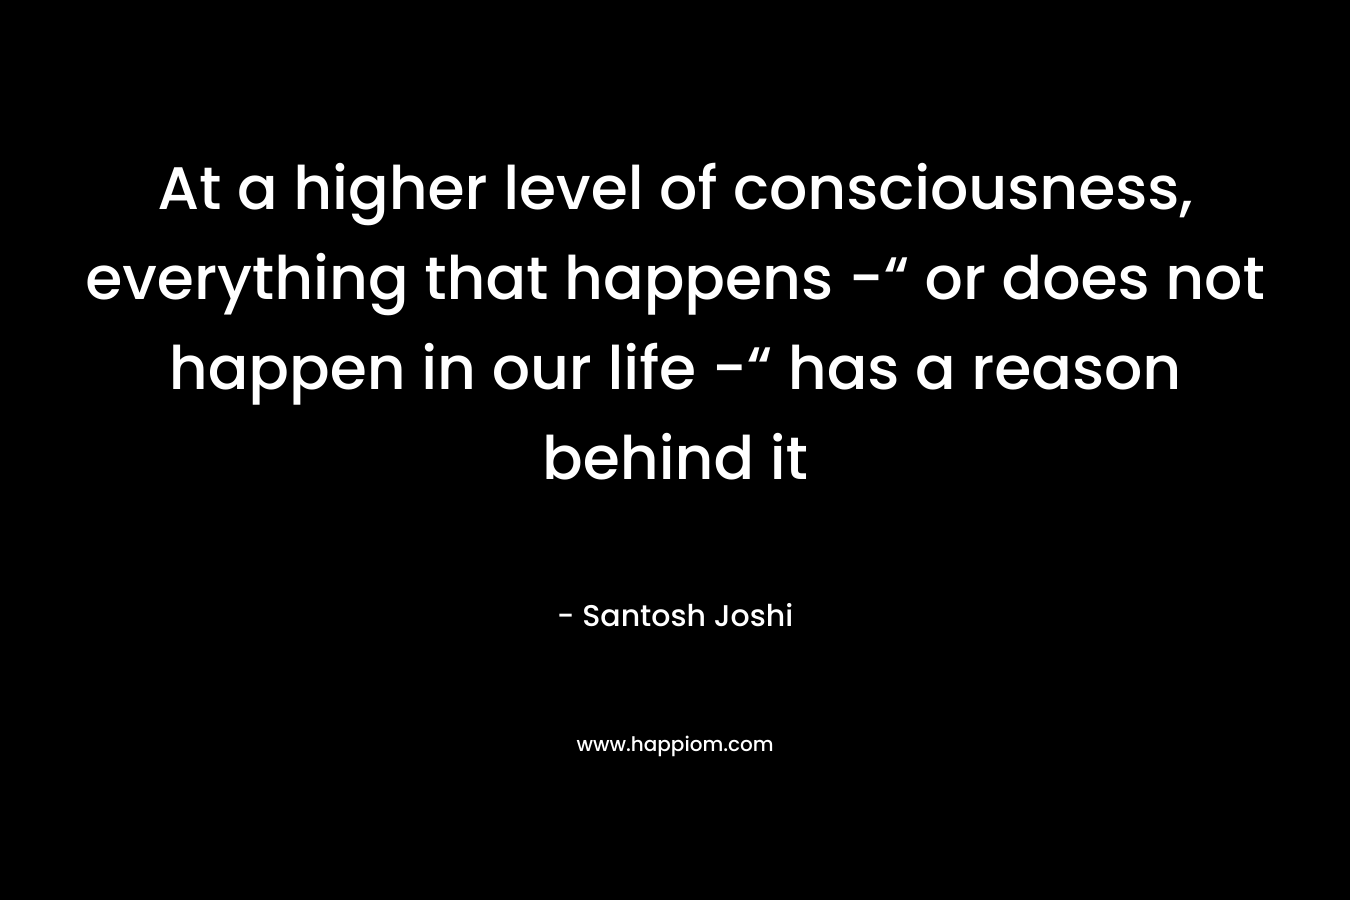 At a higher level of consciousness, everything that happens -“ or does not happen in our life -“ has a reason behind it – Santosh Joshi